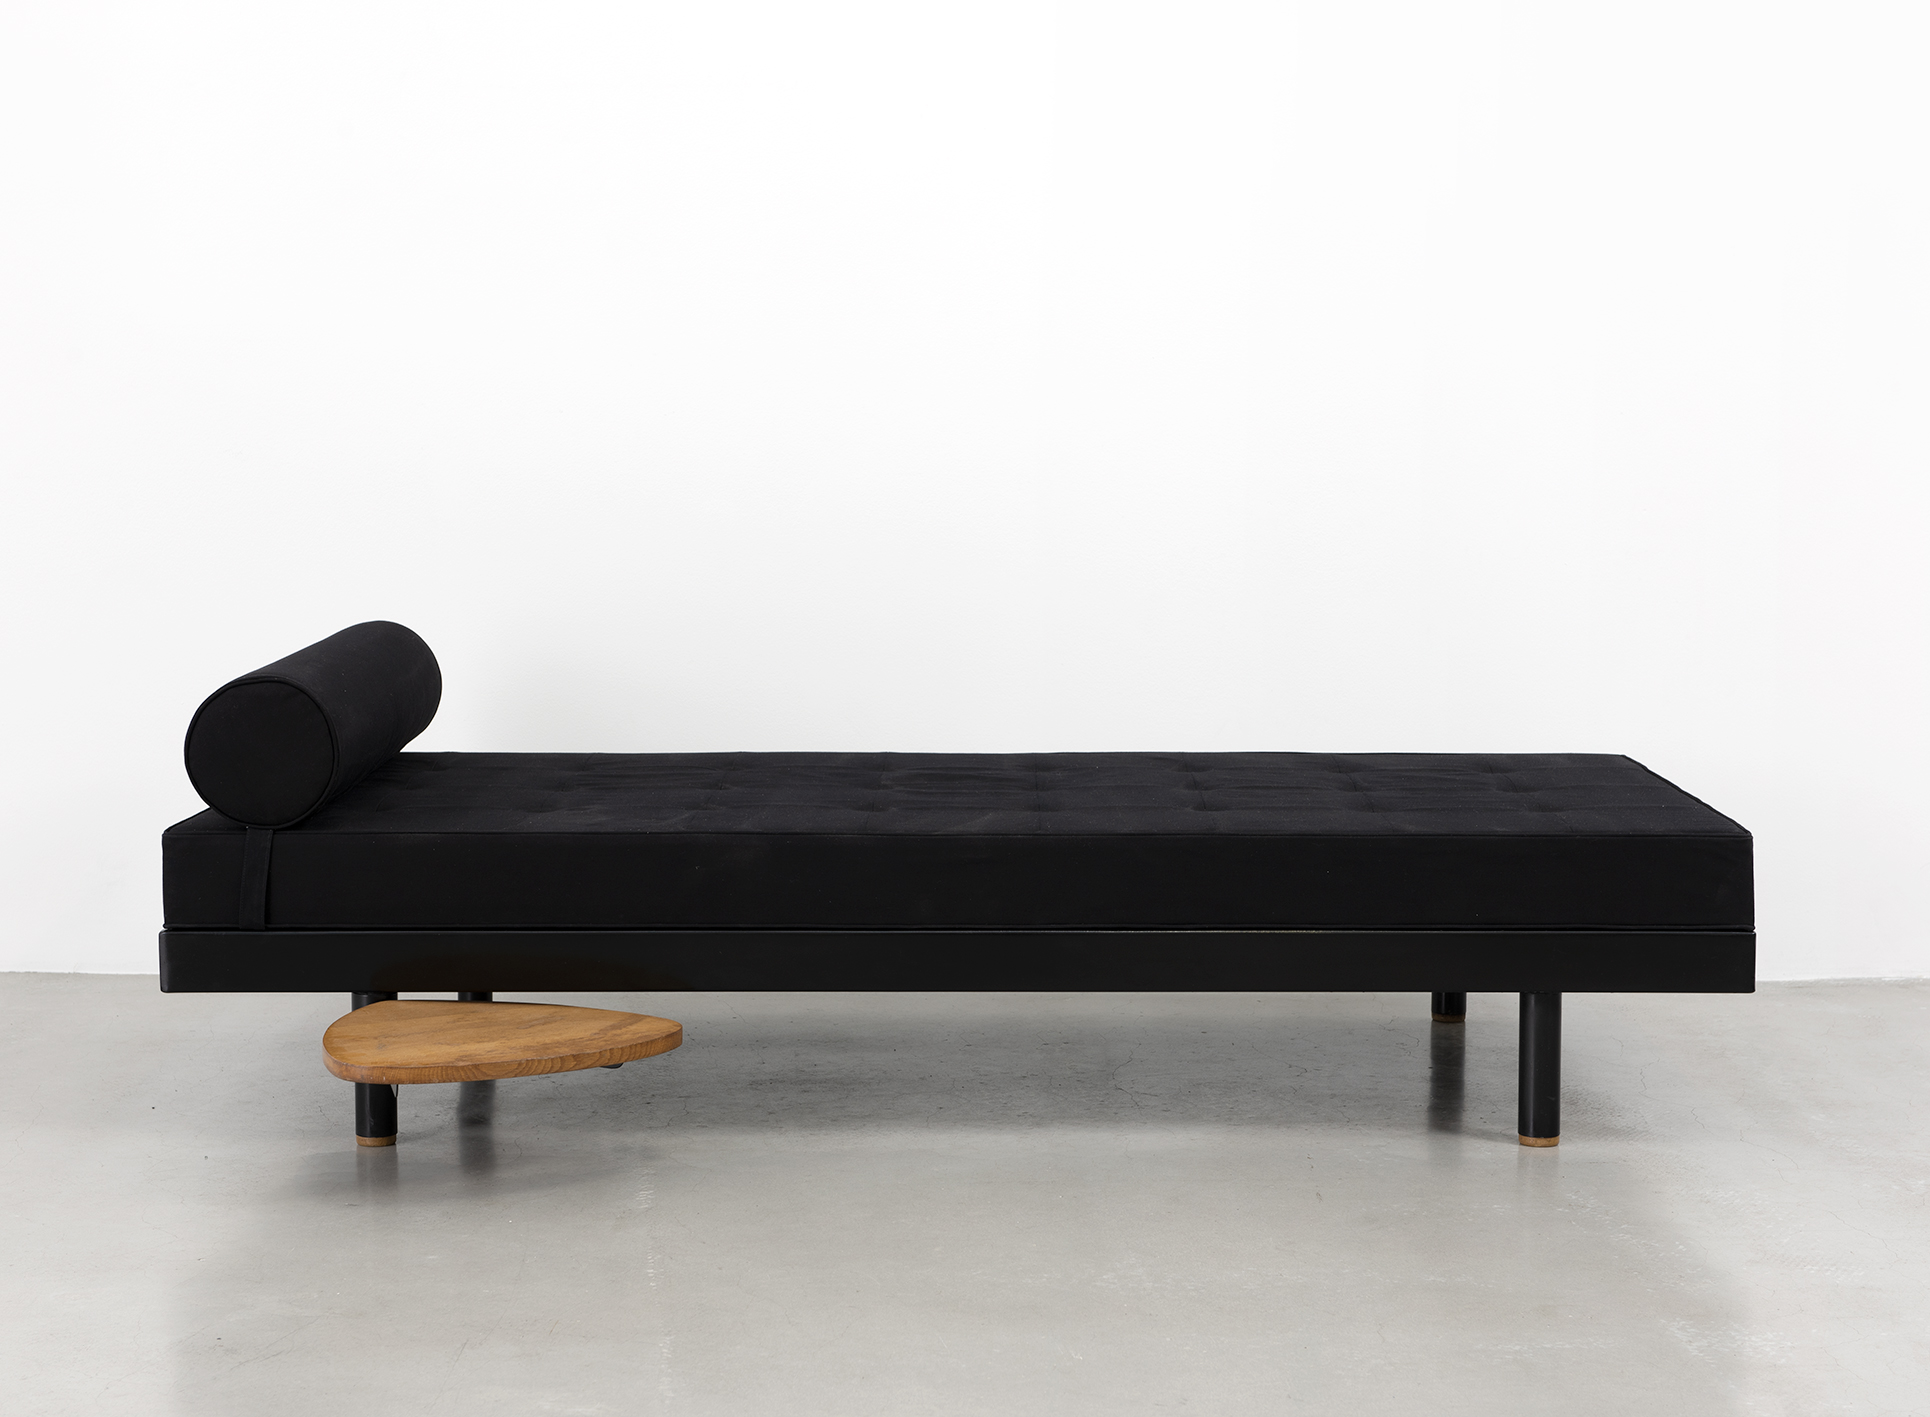 SCAL no. 450 bed, variant with swiveling tablet by Charlotte Perriand, known as the Antony bed, 1955.